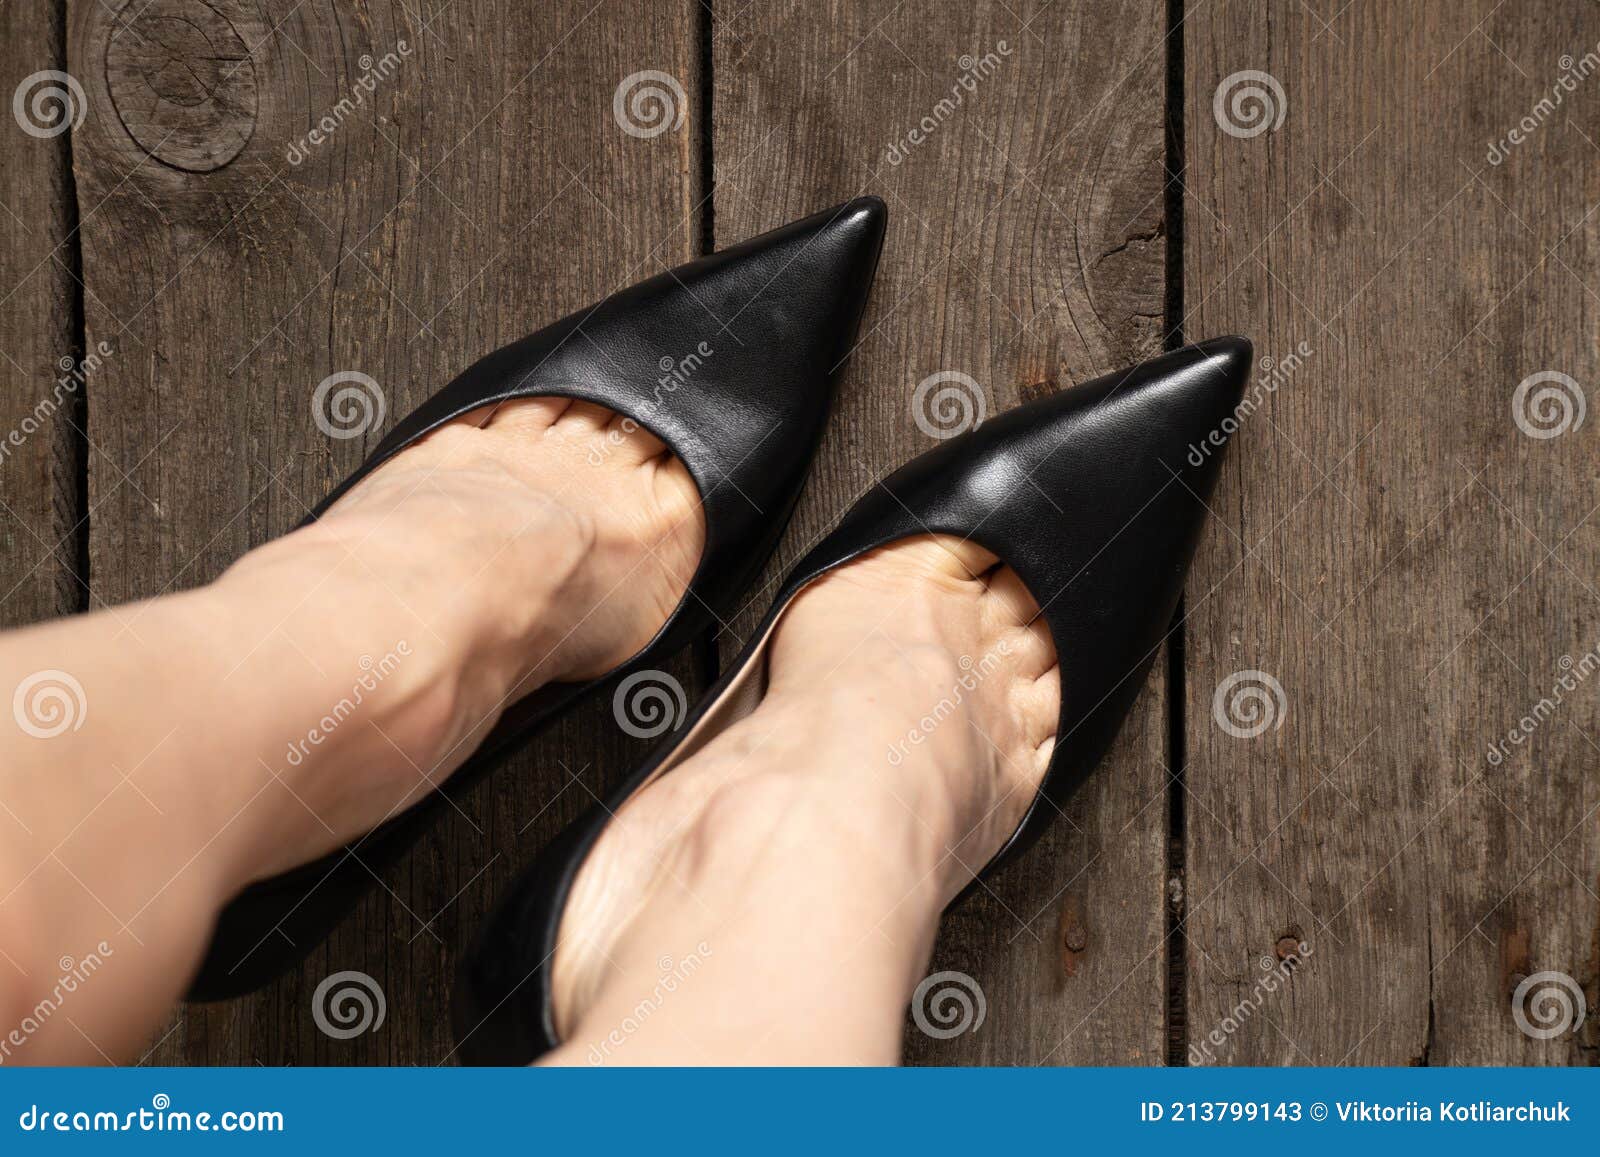 Female Legs in Black Leather High Heel Shoes on Old Wooden Floor and ...